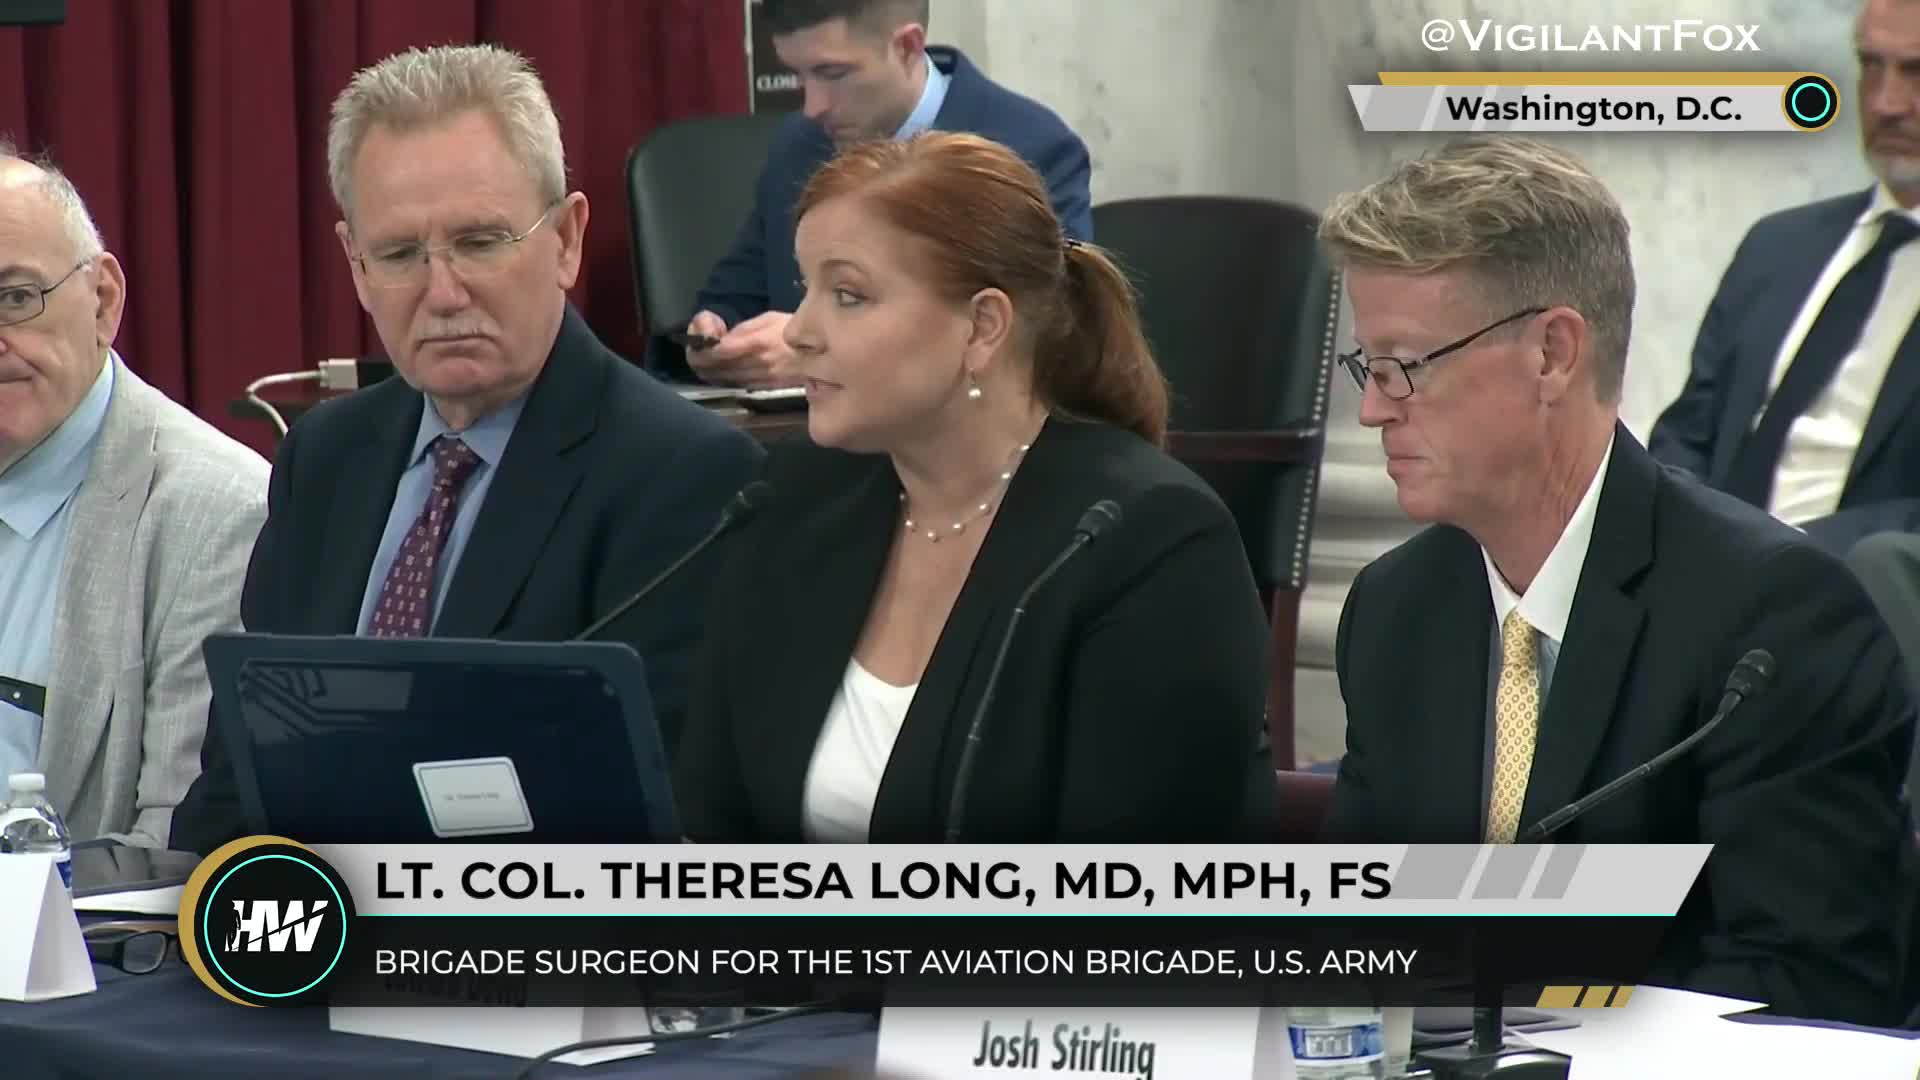 'Military Vaccine Mandates are Dangerous and Deadly': Lt. Col. Theresa Long, MD